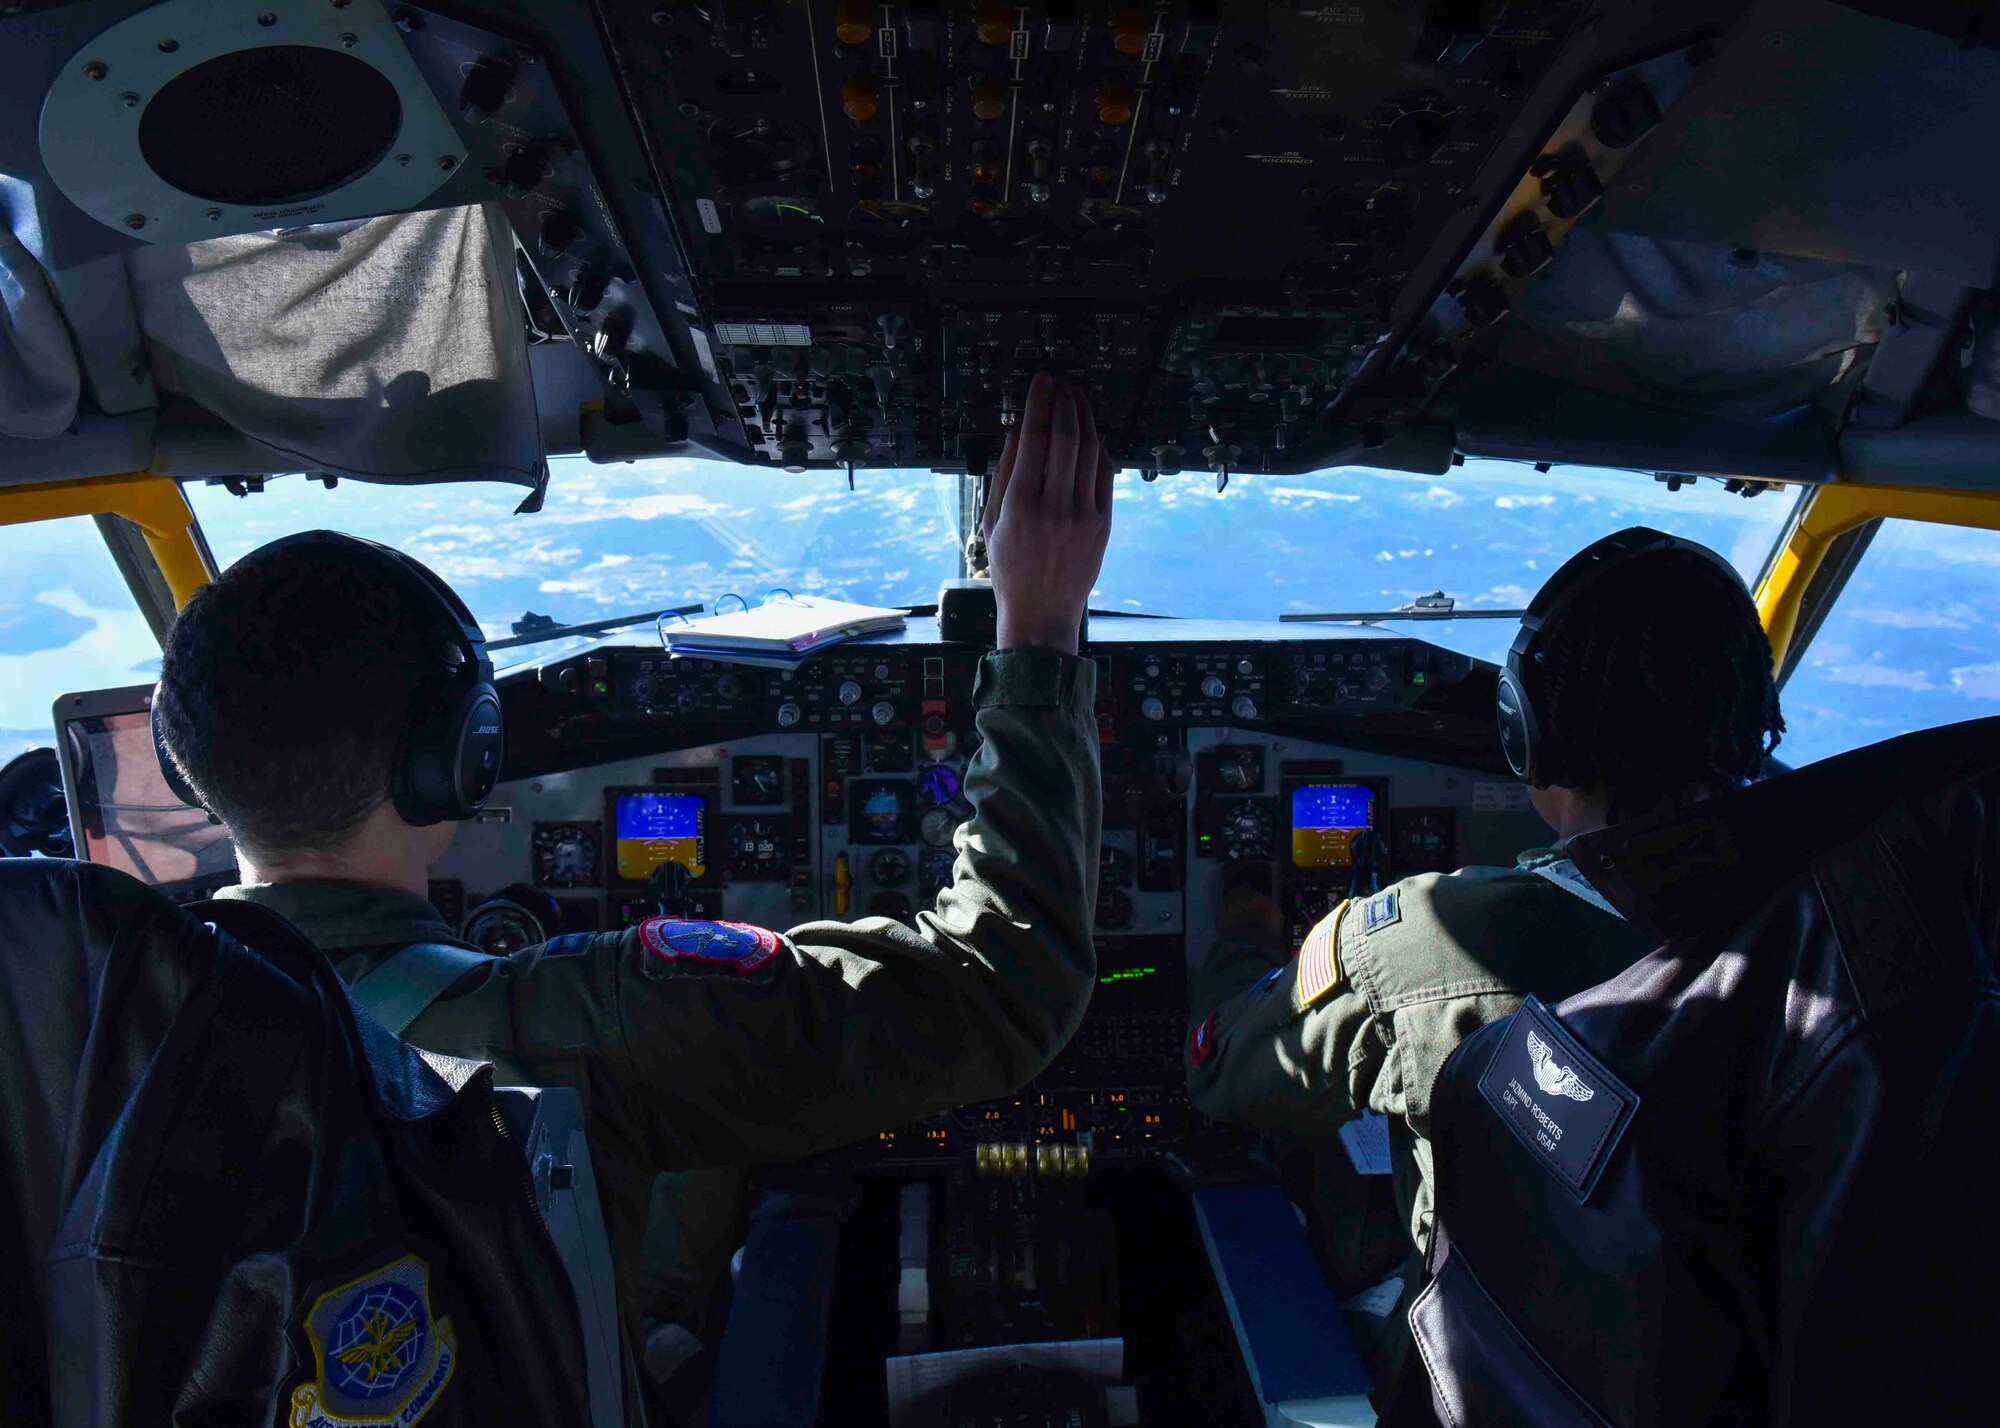 U.S. Air Force Capt. Clinton Prescott, 93rd Air Refueling Squadron pilot, and U.S. Air Force Capt. Jazmind Roberts, 93rd Air Refueling Squadron pilot, fly a Fairchild Air Force Base KC-135 Stratotanker over Idaho, February 19, 2020. Prescott, Roberts and six other black crew members flew a mission to Maxwell Air Force Base, Montgomery, Alabama, to celebrate the heritage and culture of black Airmen. (U.S. Air Force photo by Airman 1st Class Kiaundra Miller)